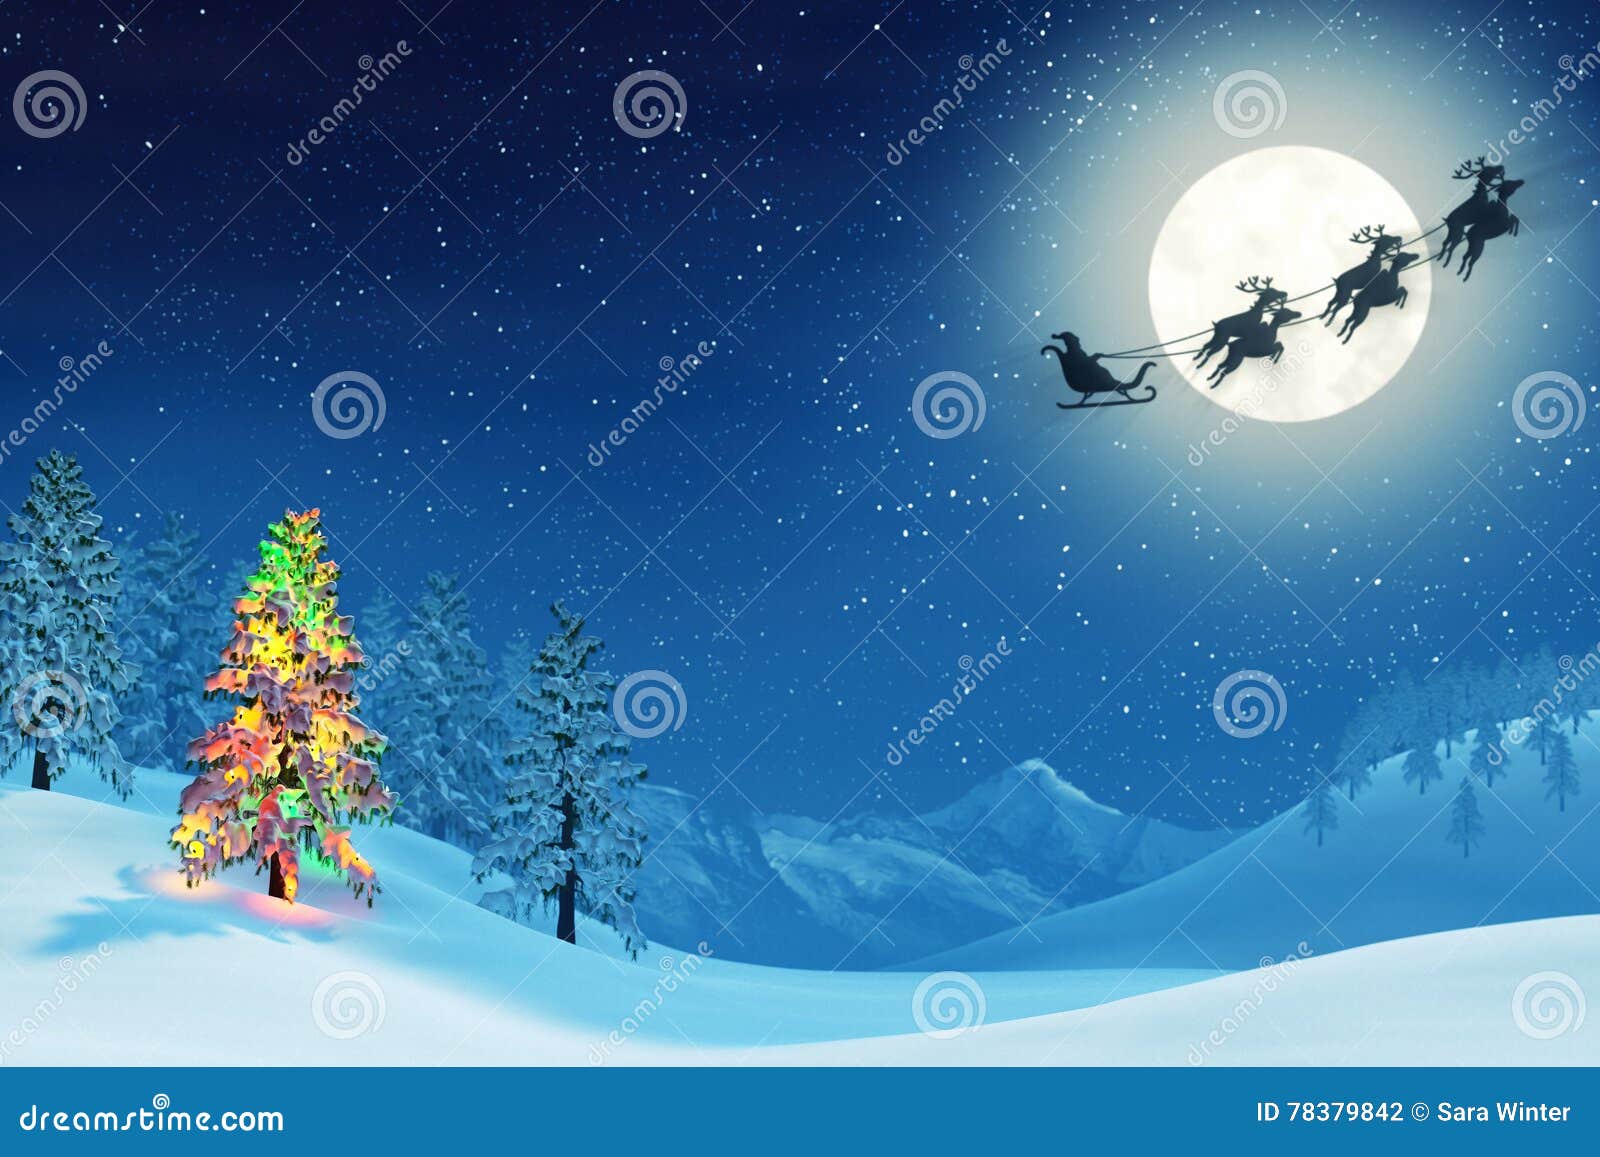 christmas tree and santa in moonlit winter landscape